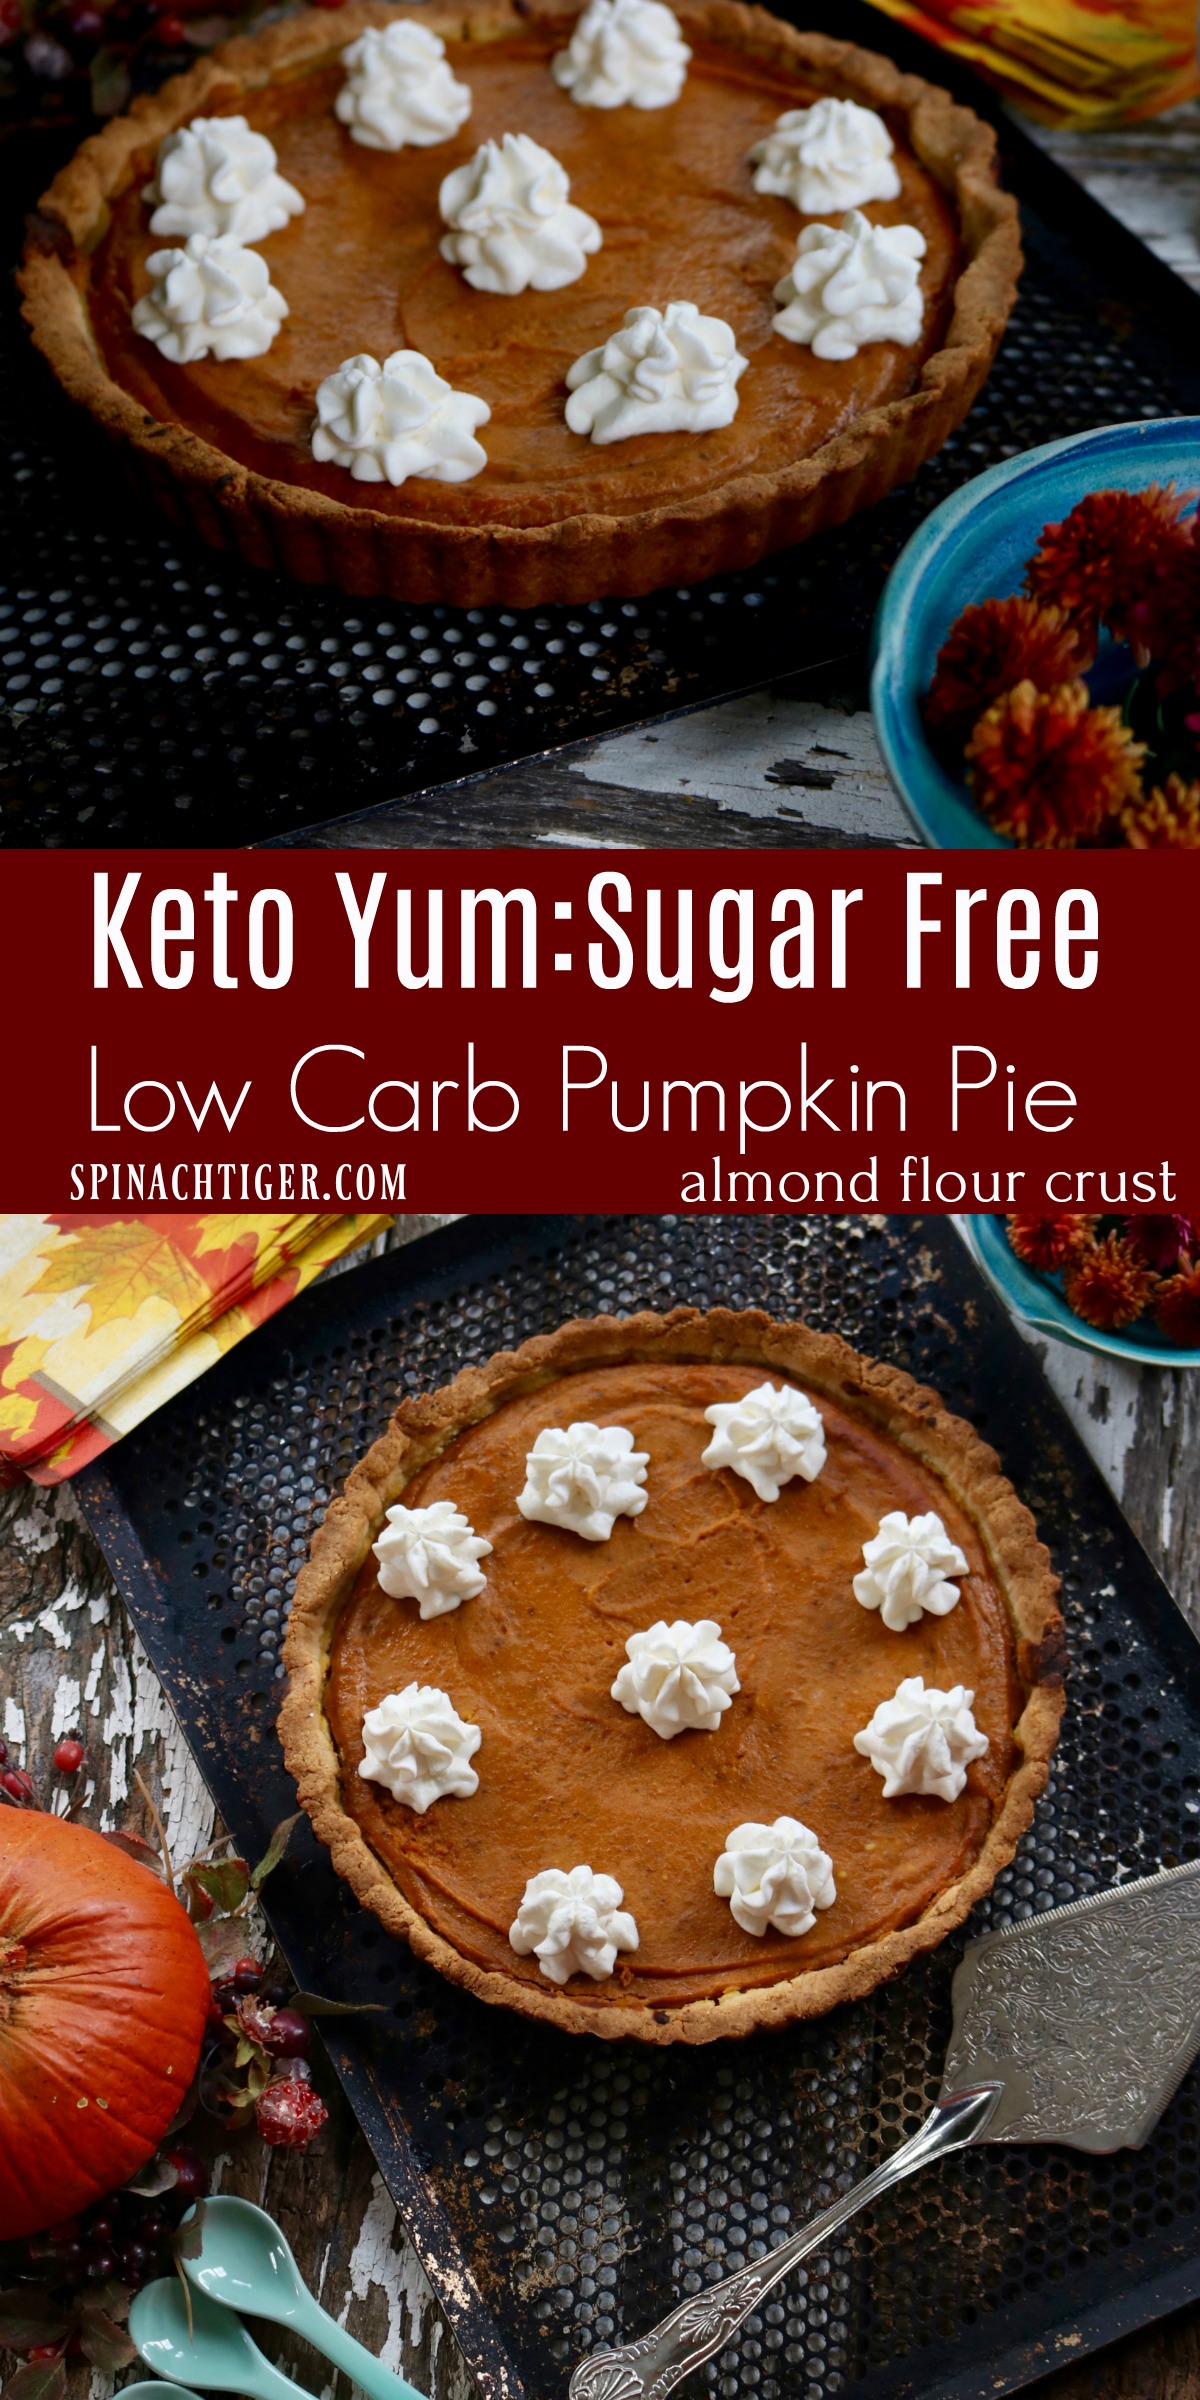 Low Carb Pumpkin Pie , 7 net carbs, Keto Recipe from Spinach Tiger